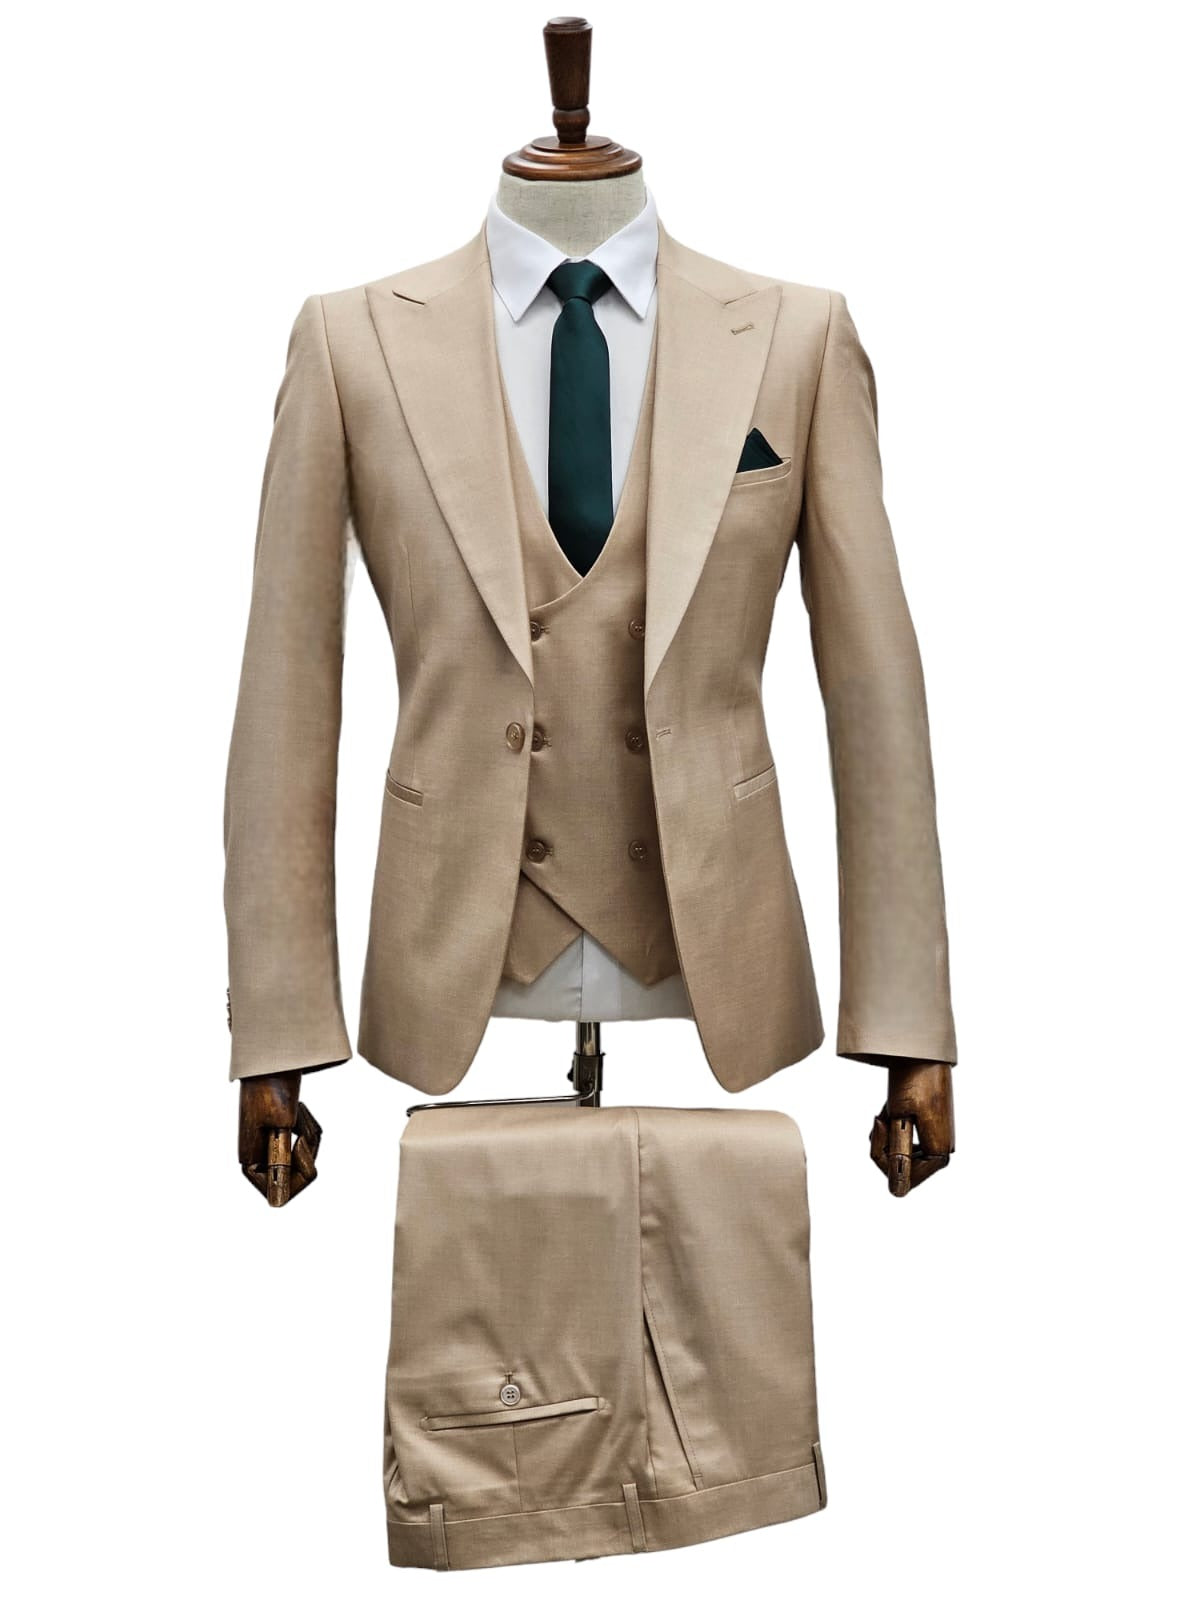 Giovanni Testi Suits With Double Breasted Vest - 3 Piece Beige